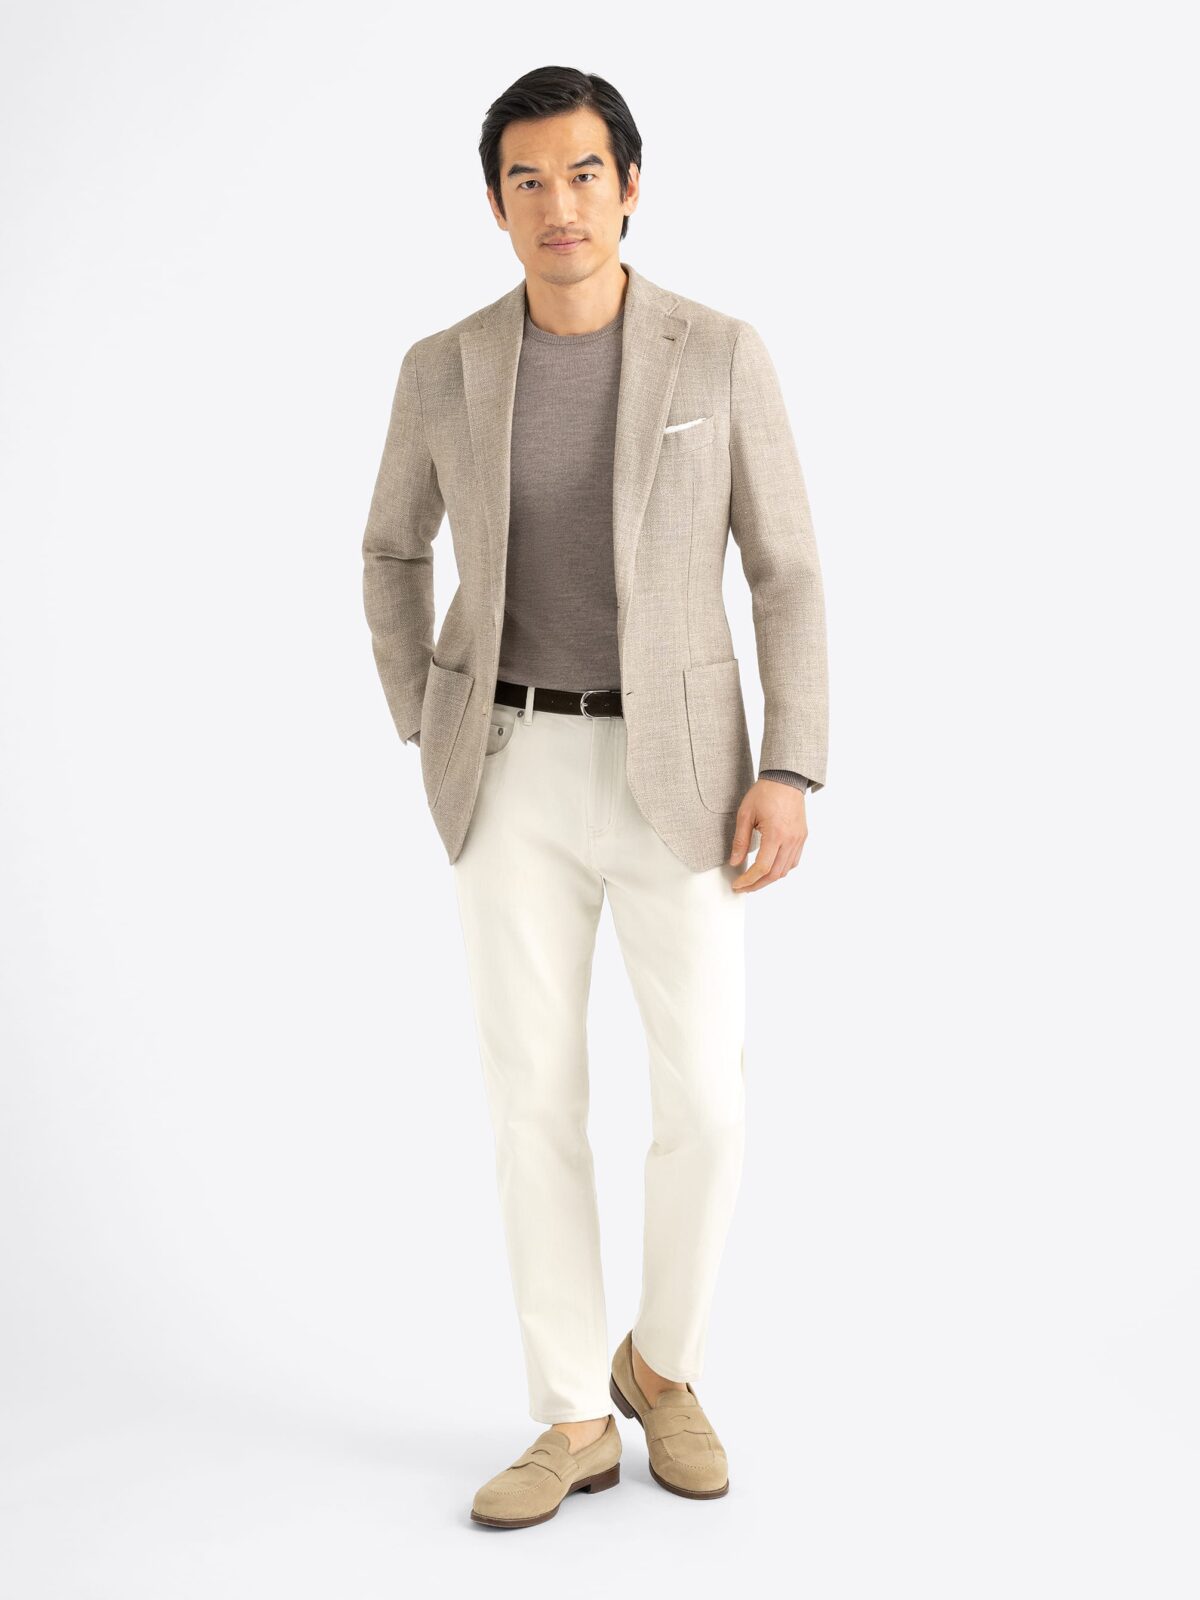 Beige Wool and Linen Waverly Jacket - Custom Fit Tailored Clothing